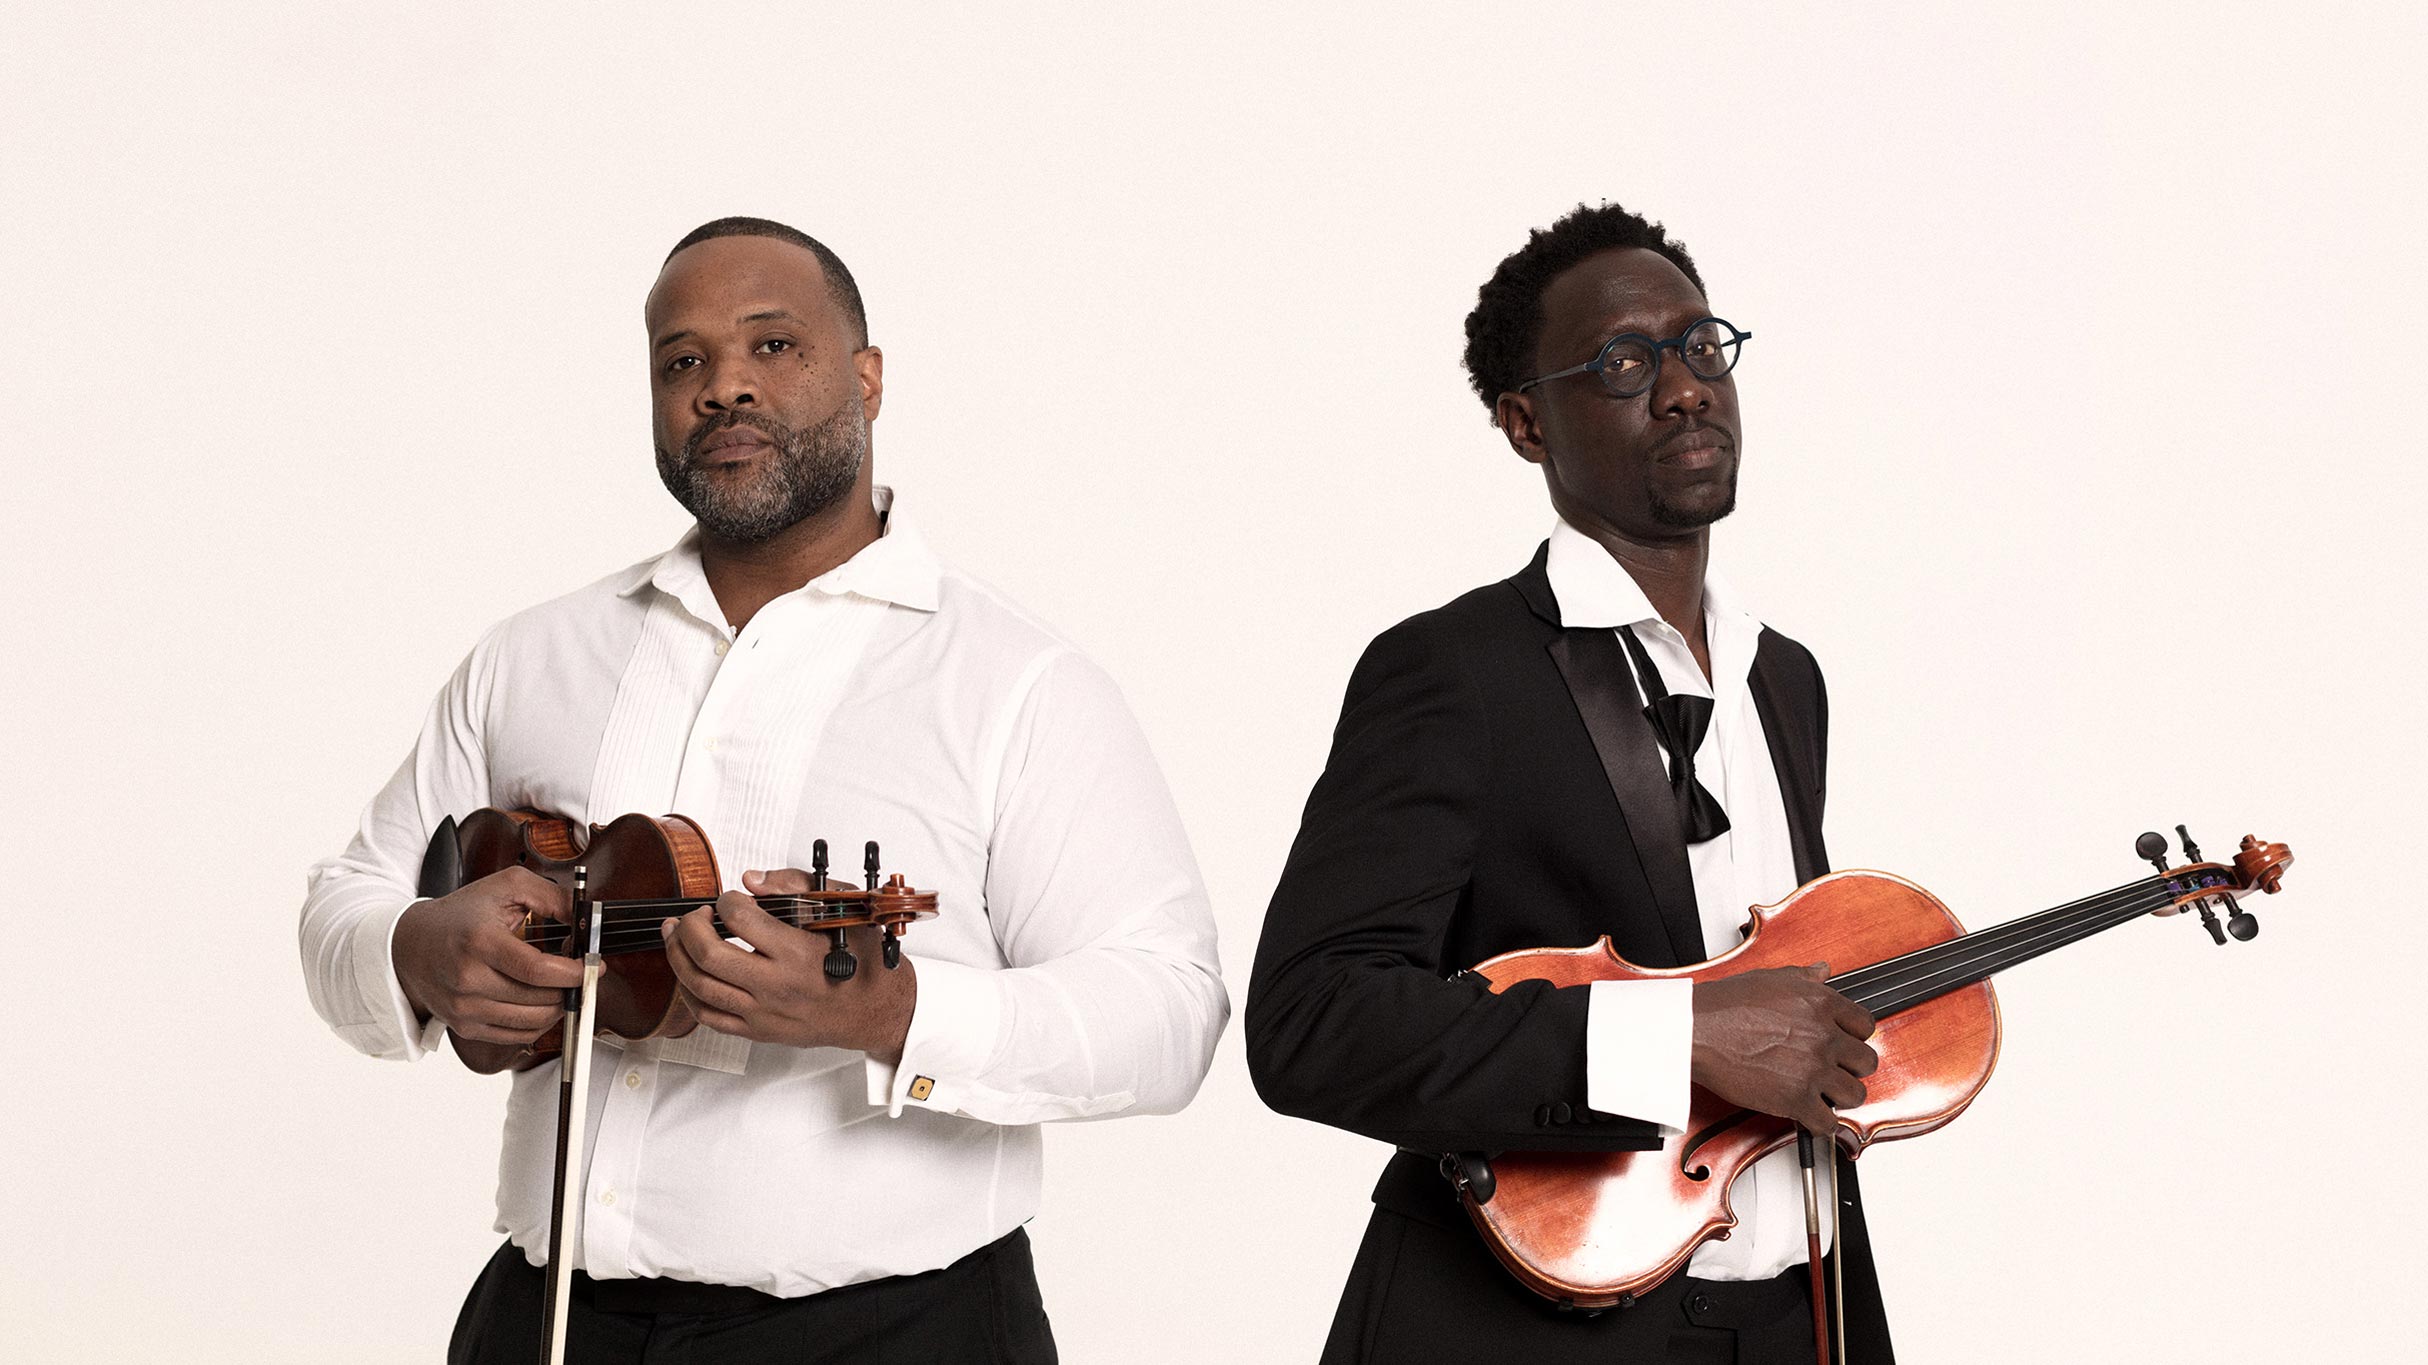 Black Violin - BV20: Then & Now pre-sale code for approved tickets in Reno